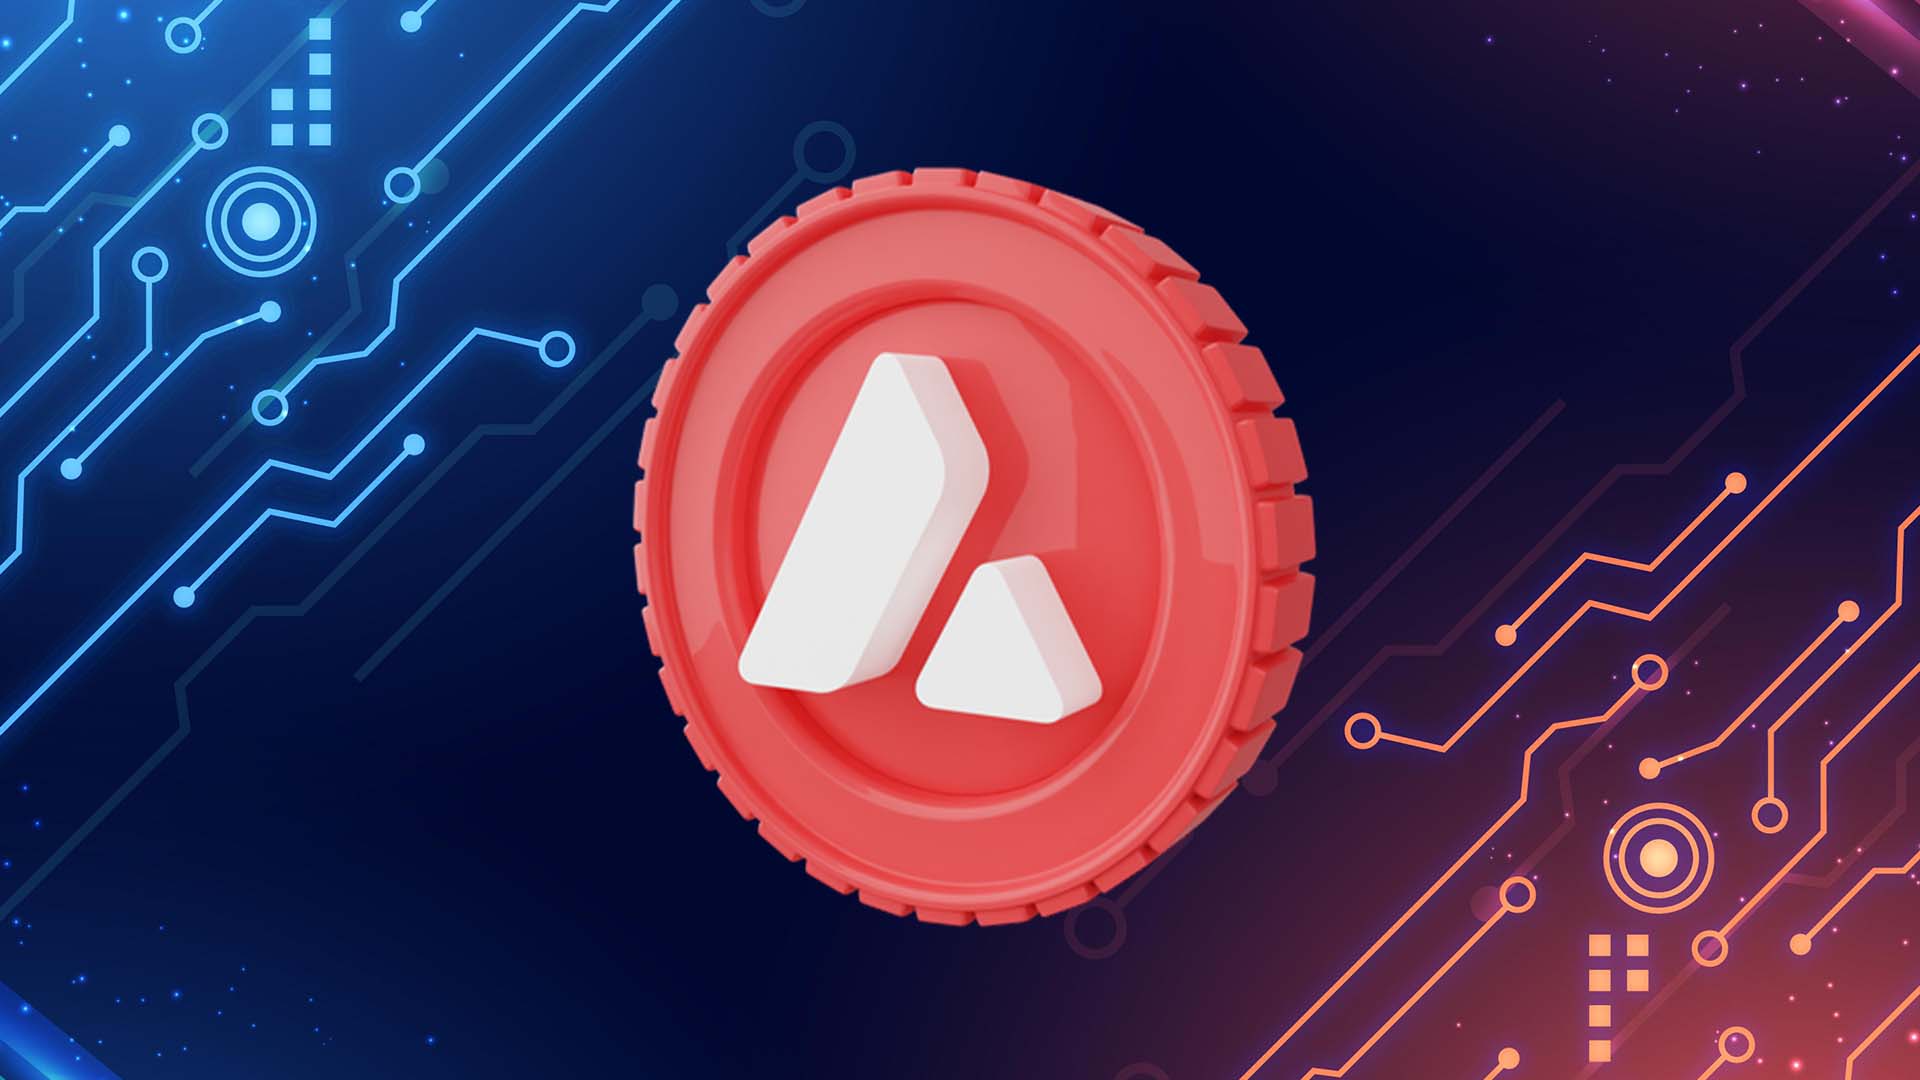 AVAX Token Rise Pushes Avalanche DeFi to New Levels